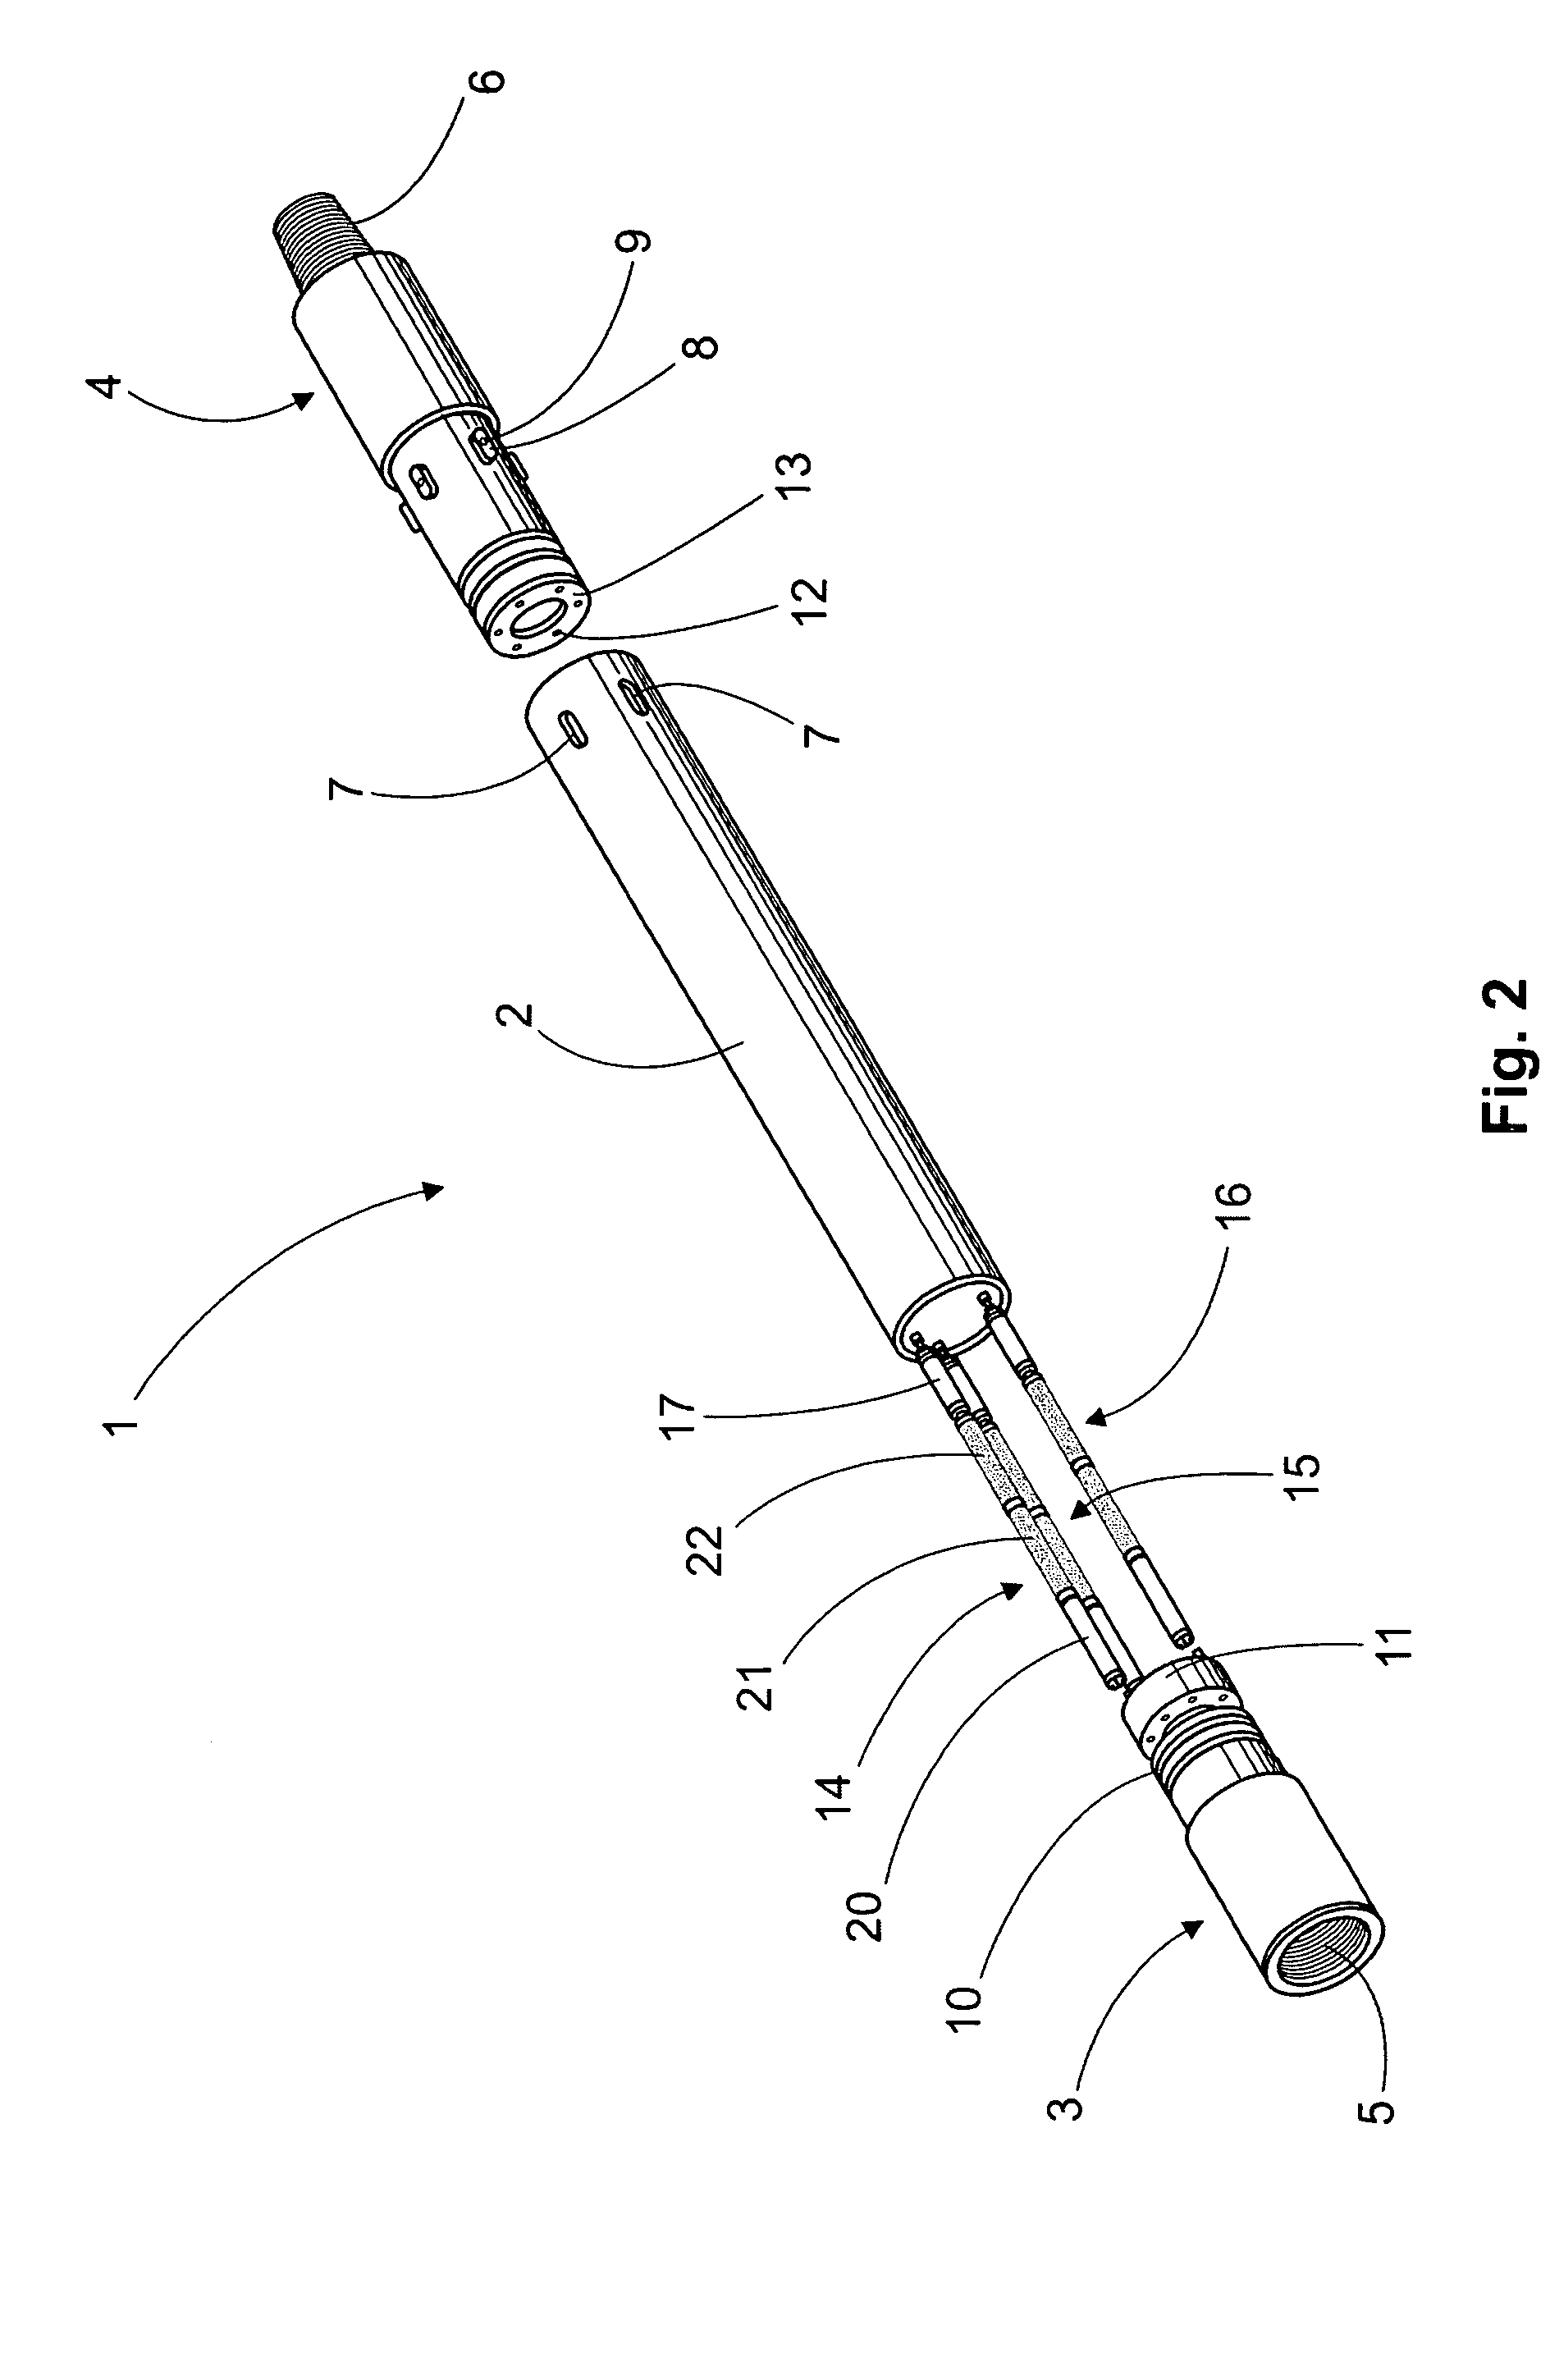 Device for generating electrical energy from a vibrating tool